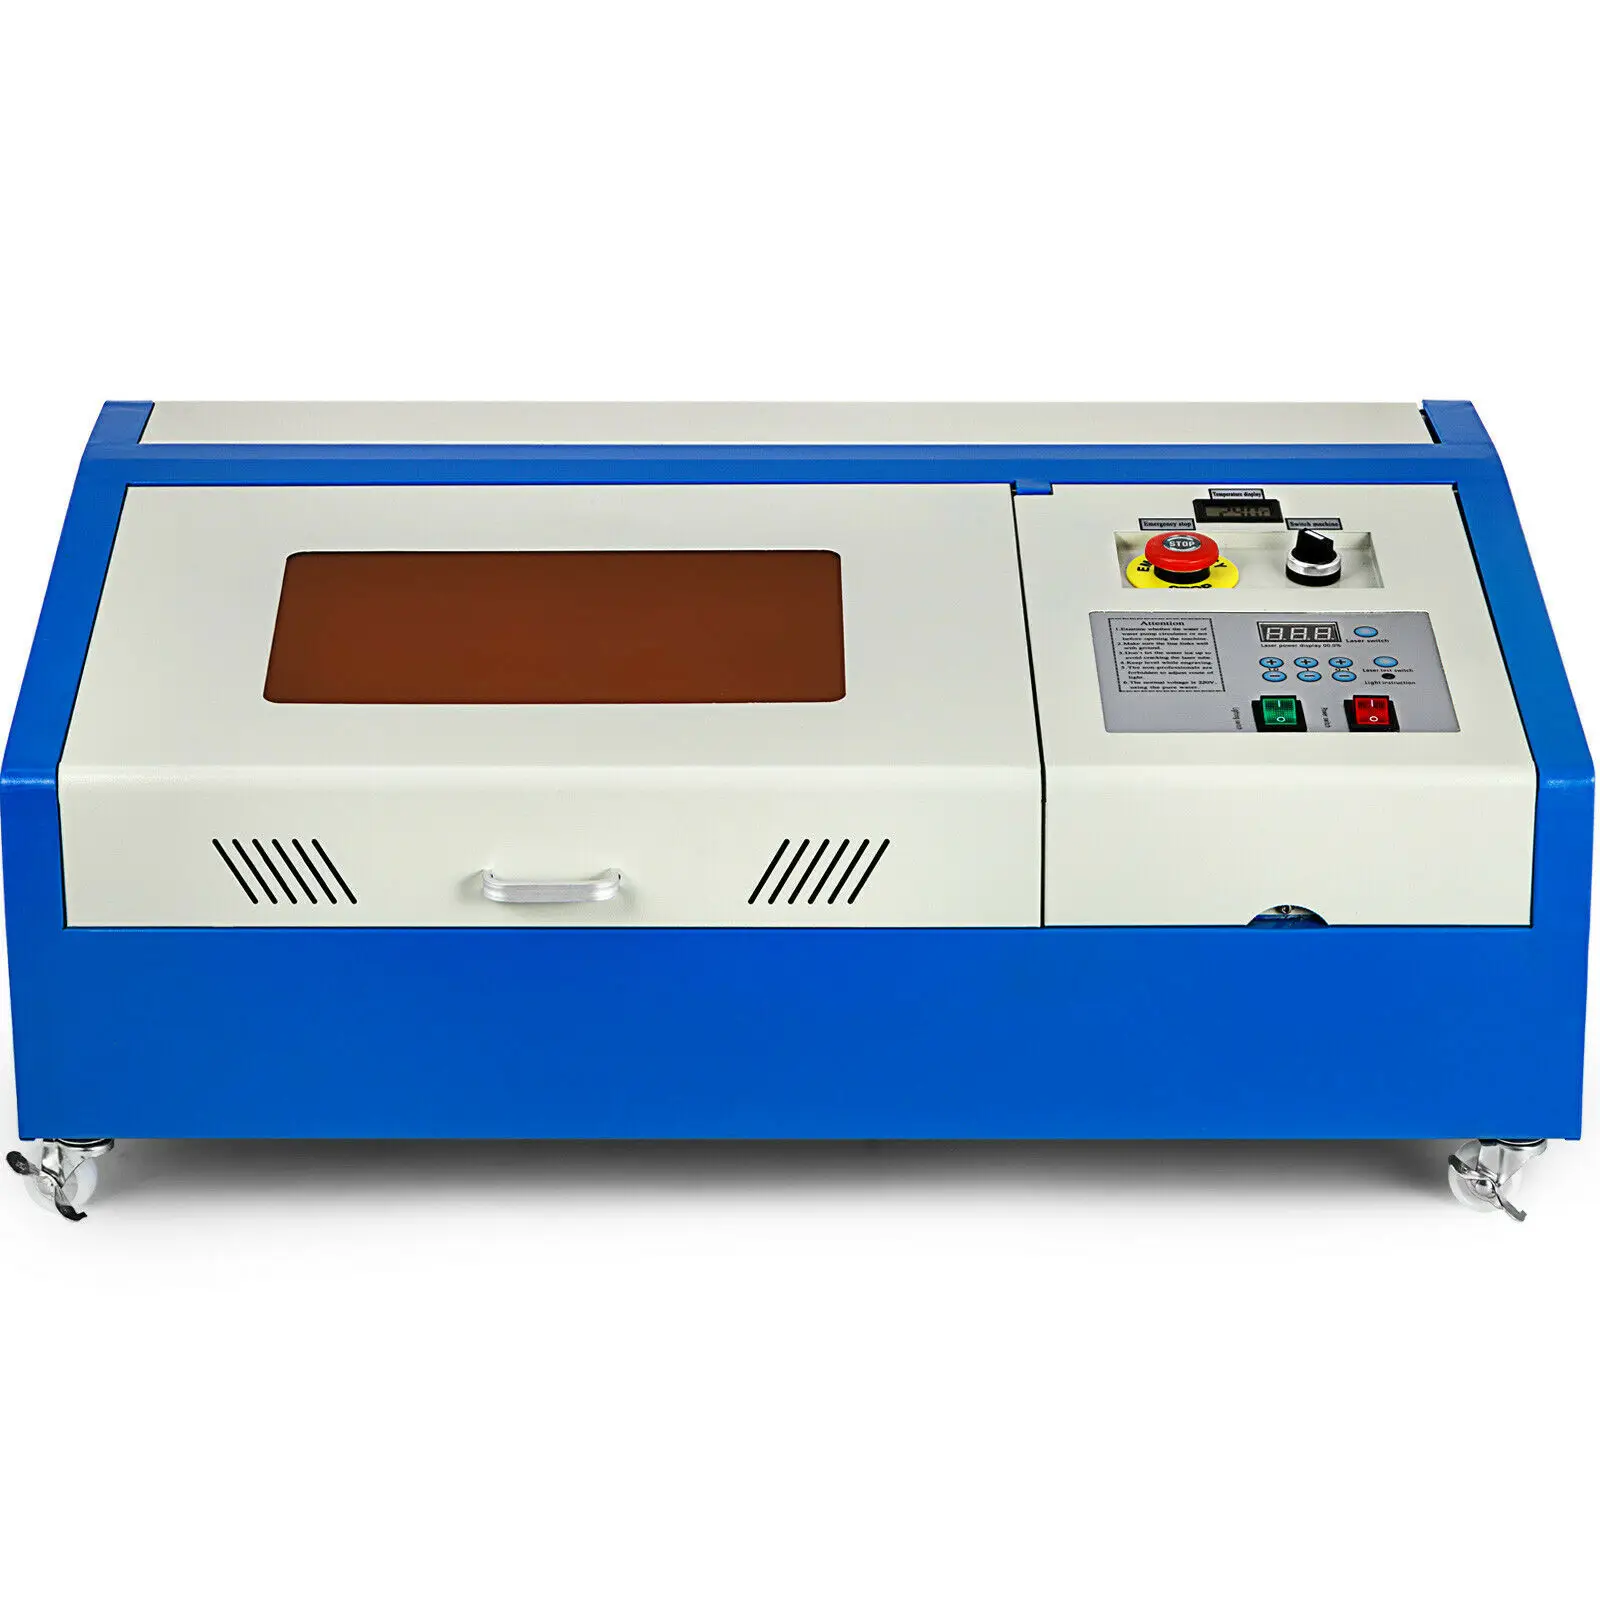 40W CO2 Laser Engraver K40 Engraving Cutting Machine LCD 300x200mm Wheels With Laser Tube For Bamboo Plank Wood Acrylic